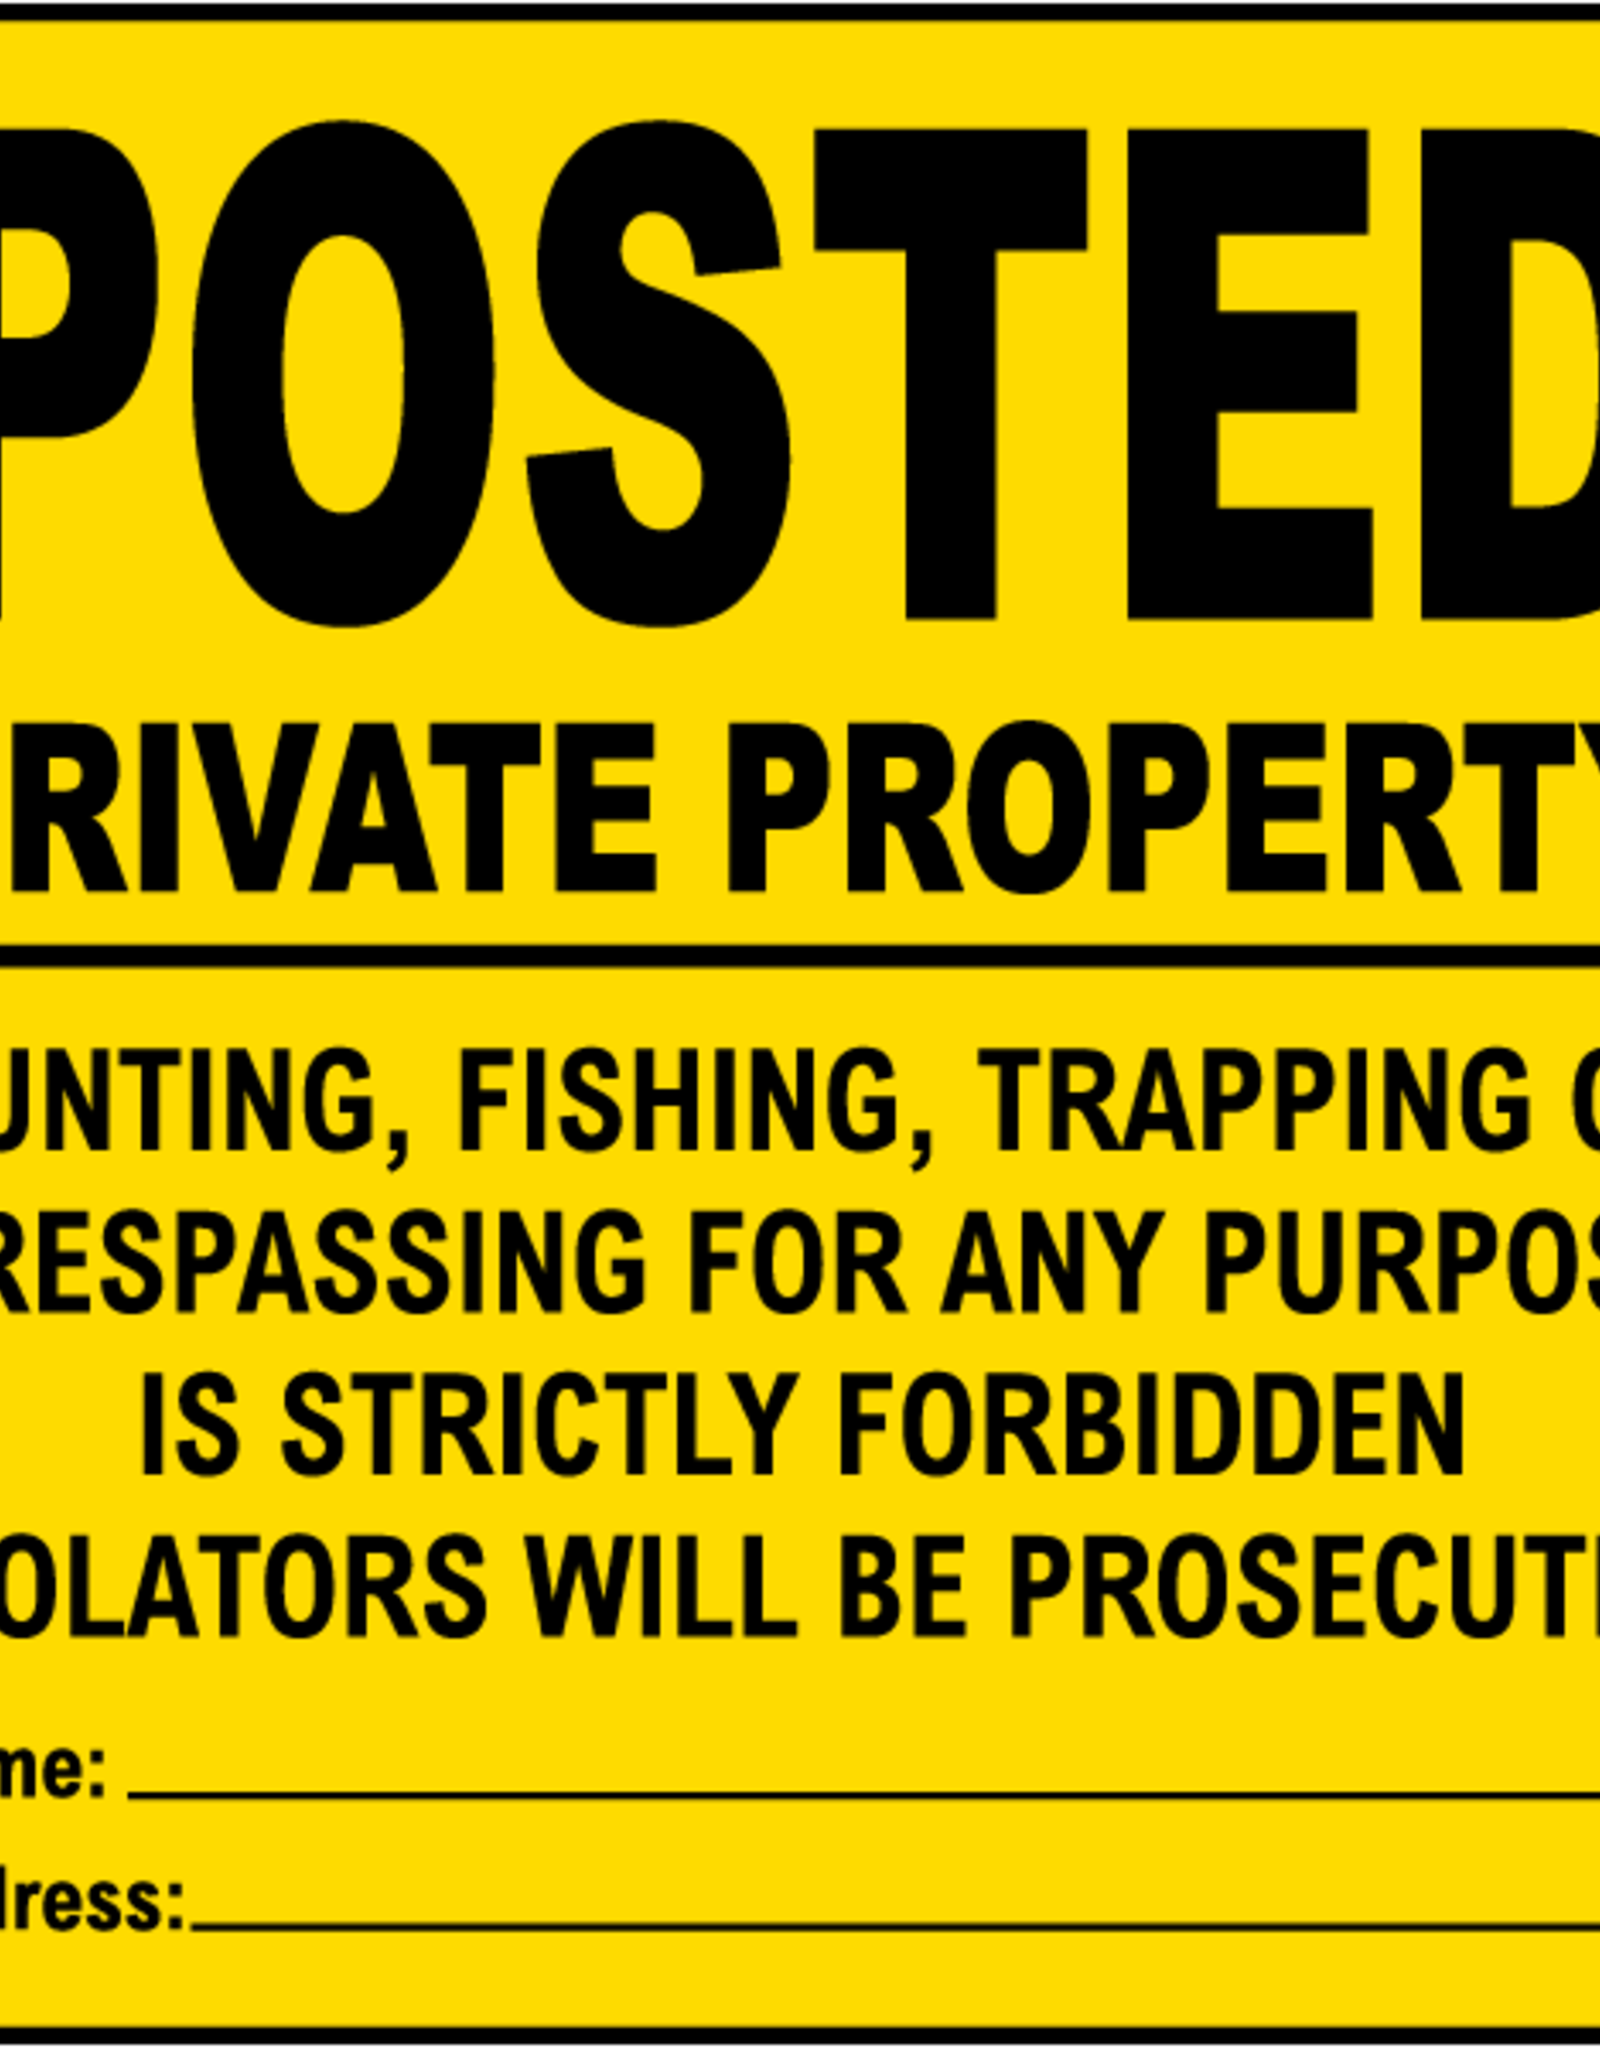 HME Posted Private Property Signs 12 Pack